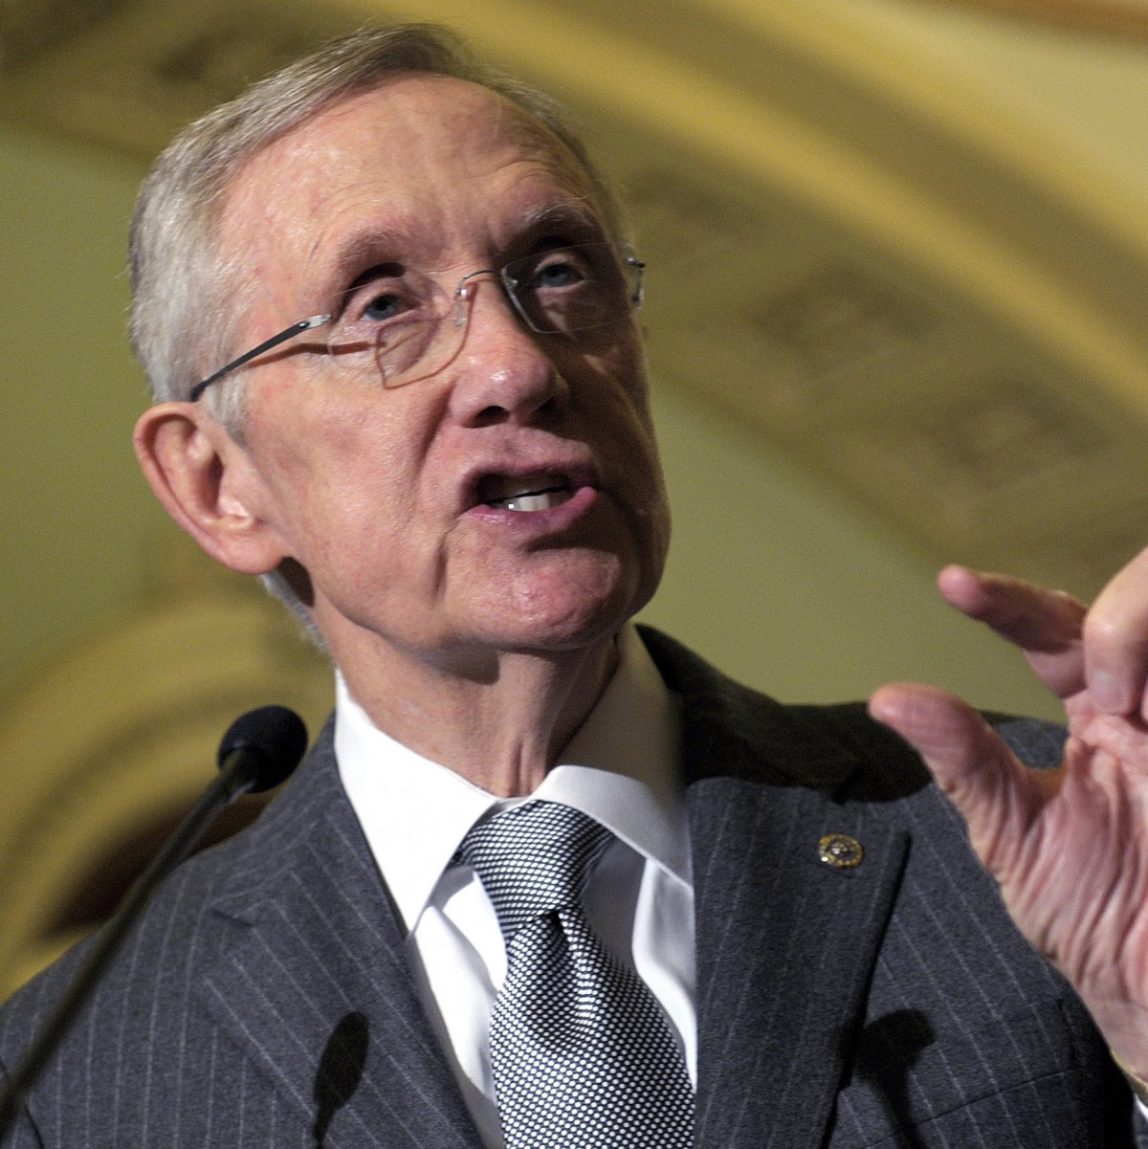 Senate Majority Leader Harry Reid of Nevada speaks to reporters following the Democratic policy luncheon on Capitol Hill in Washington, Tuesday, Dec. 18, 2012. (AP Photo/Susan Walsh)